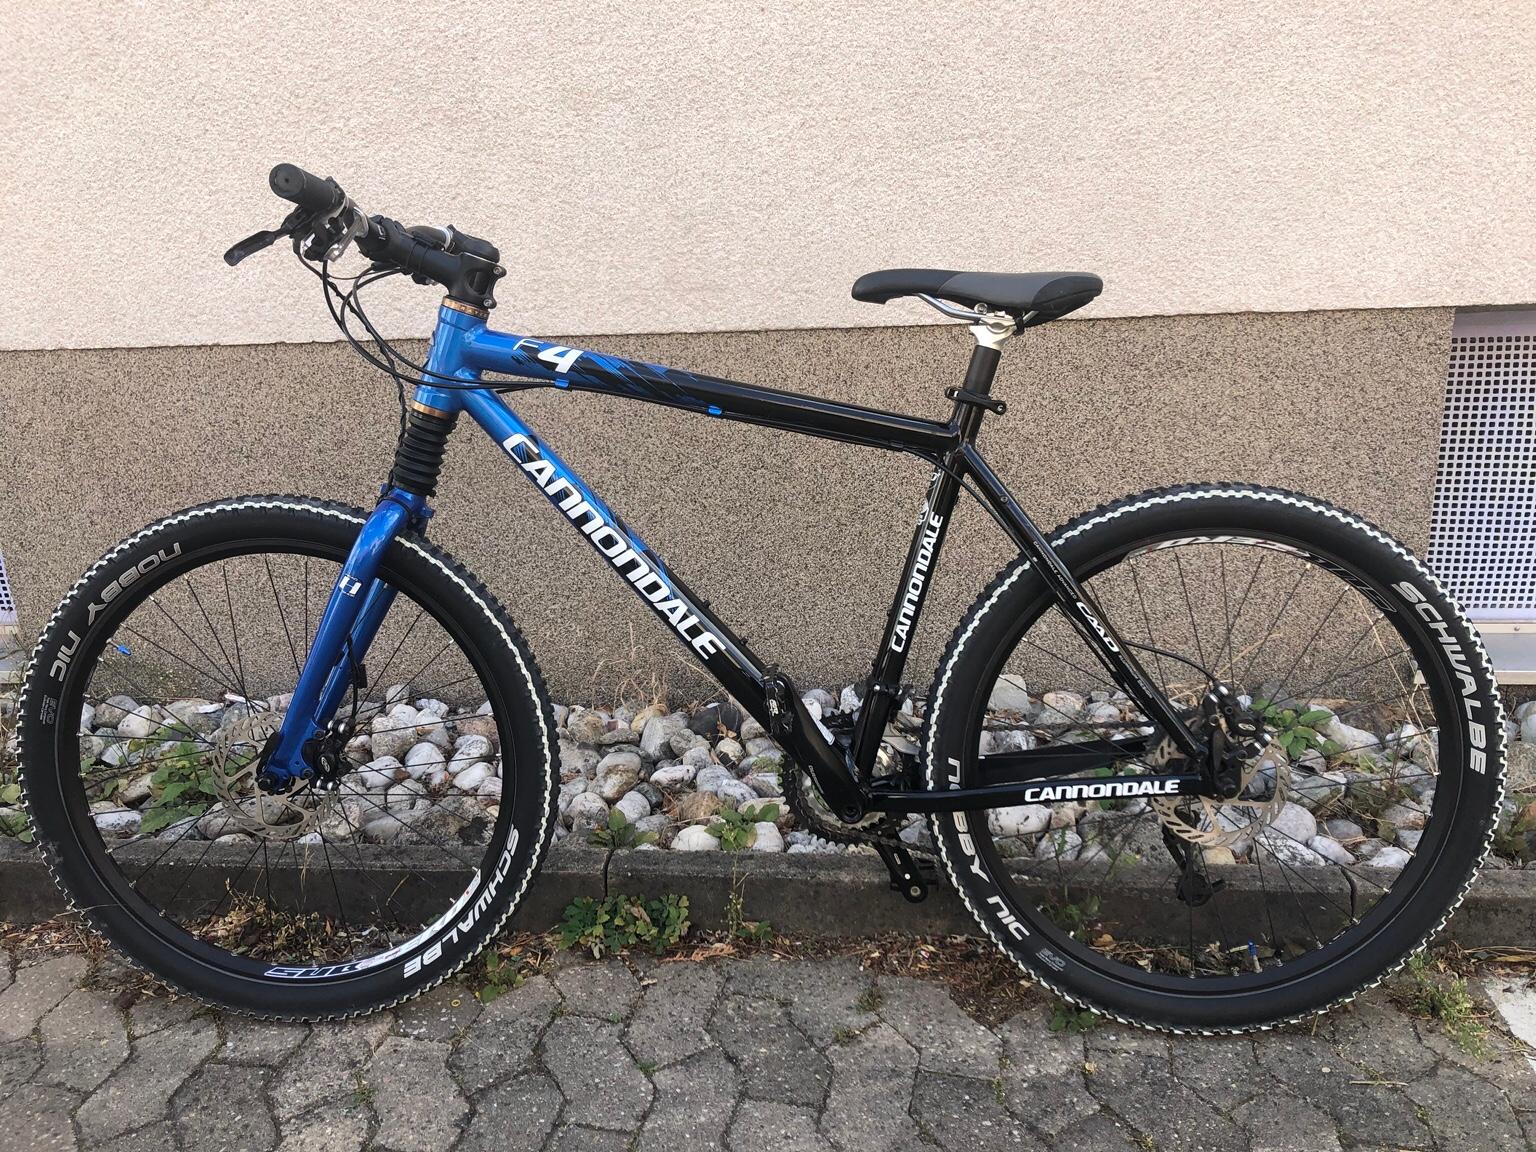 Cannondale F4 Headshock In 90556 Cadolzburg For 500 00 For Sale